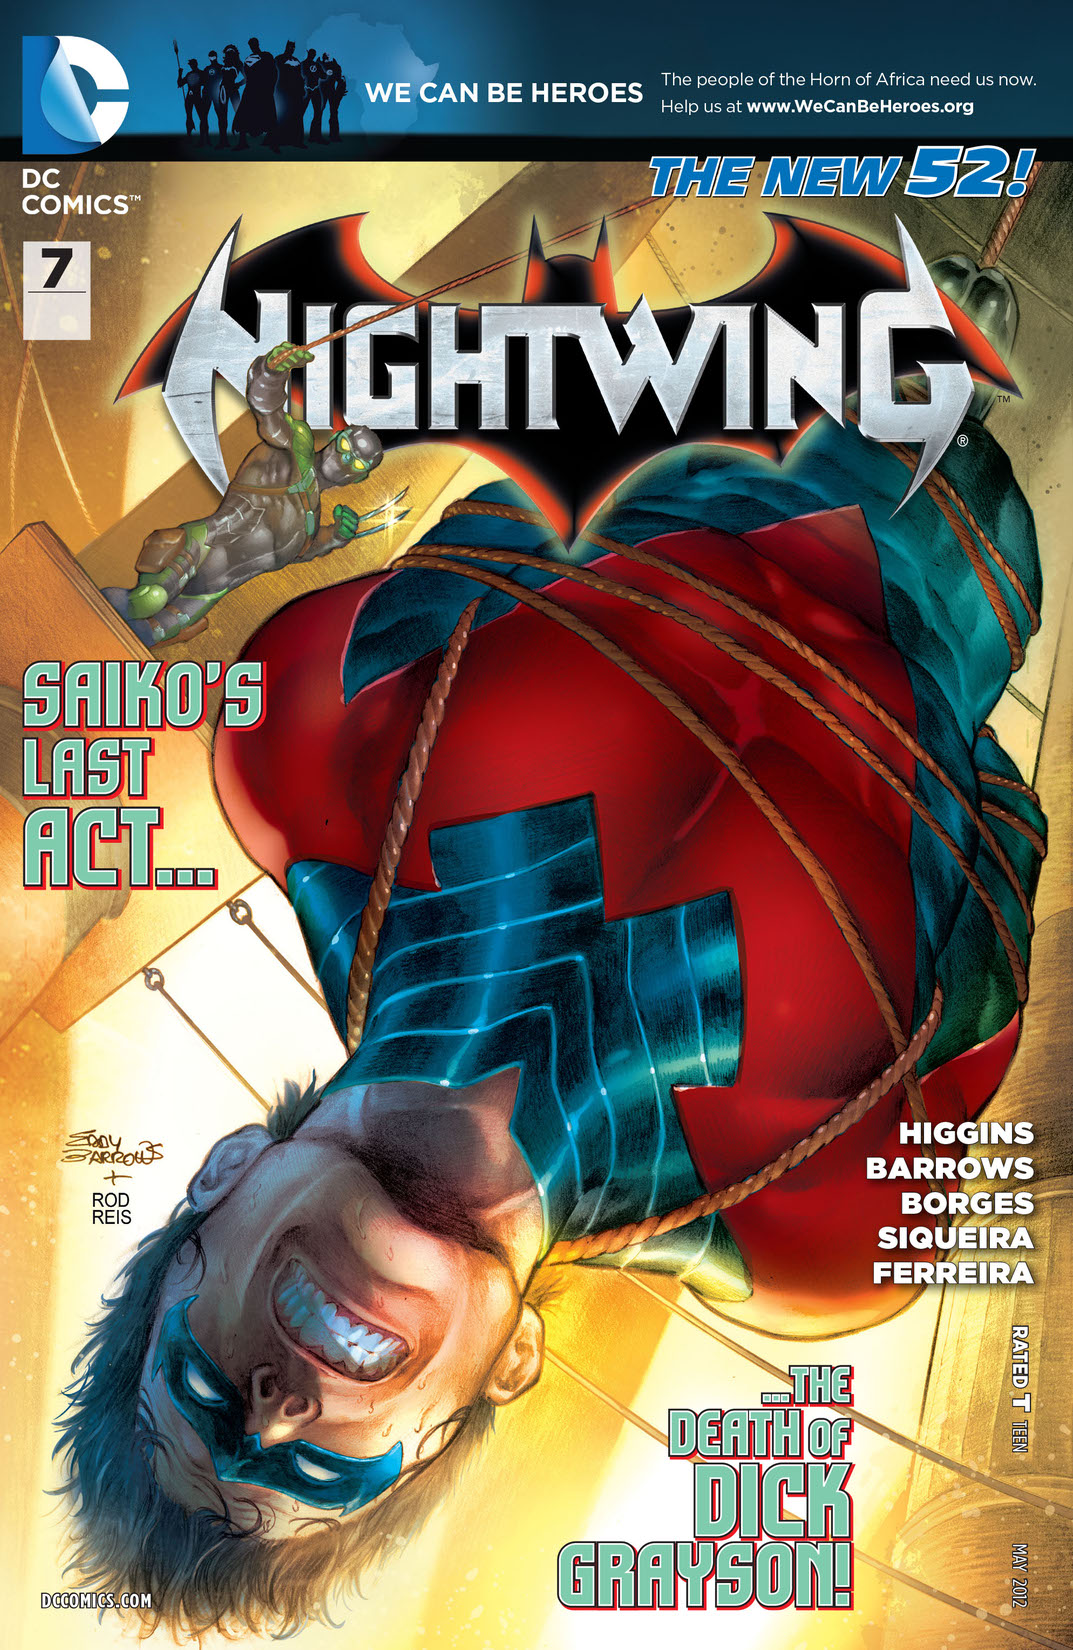 Nightwing (2011-) #7 preview images